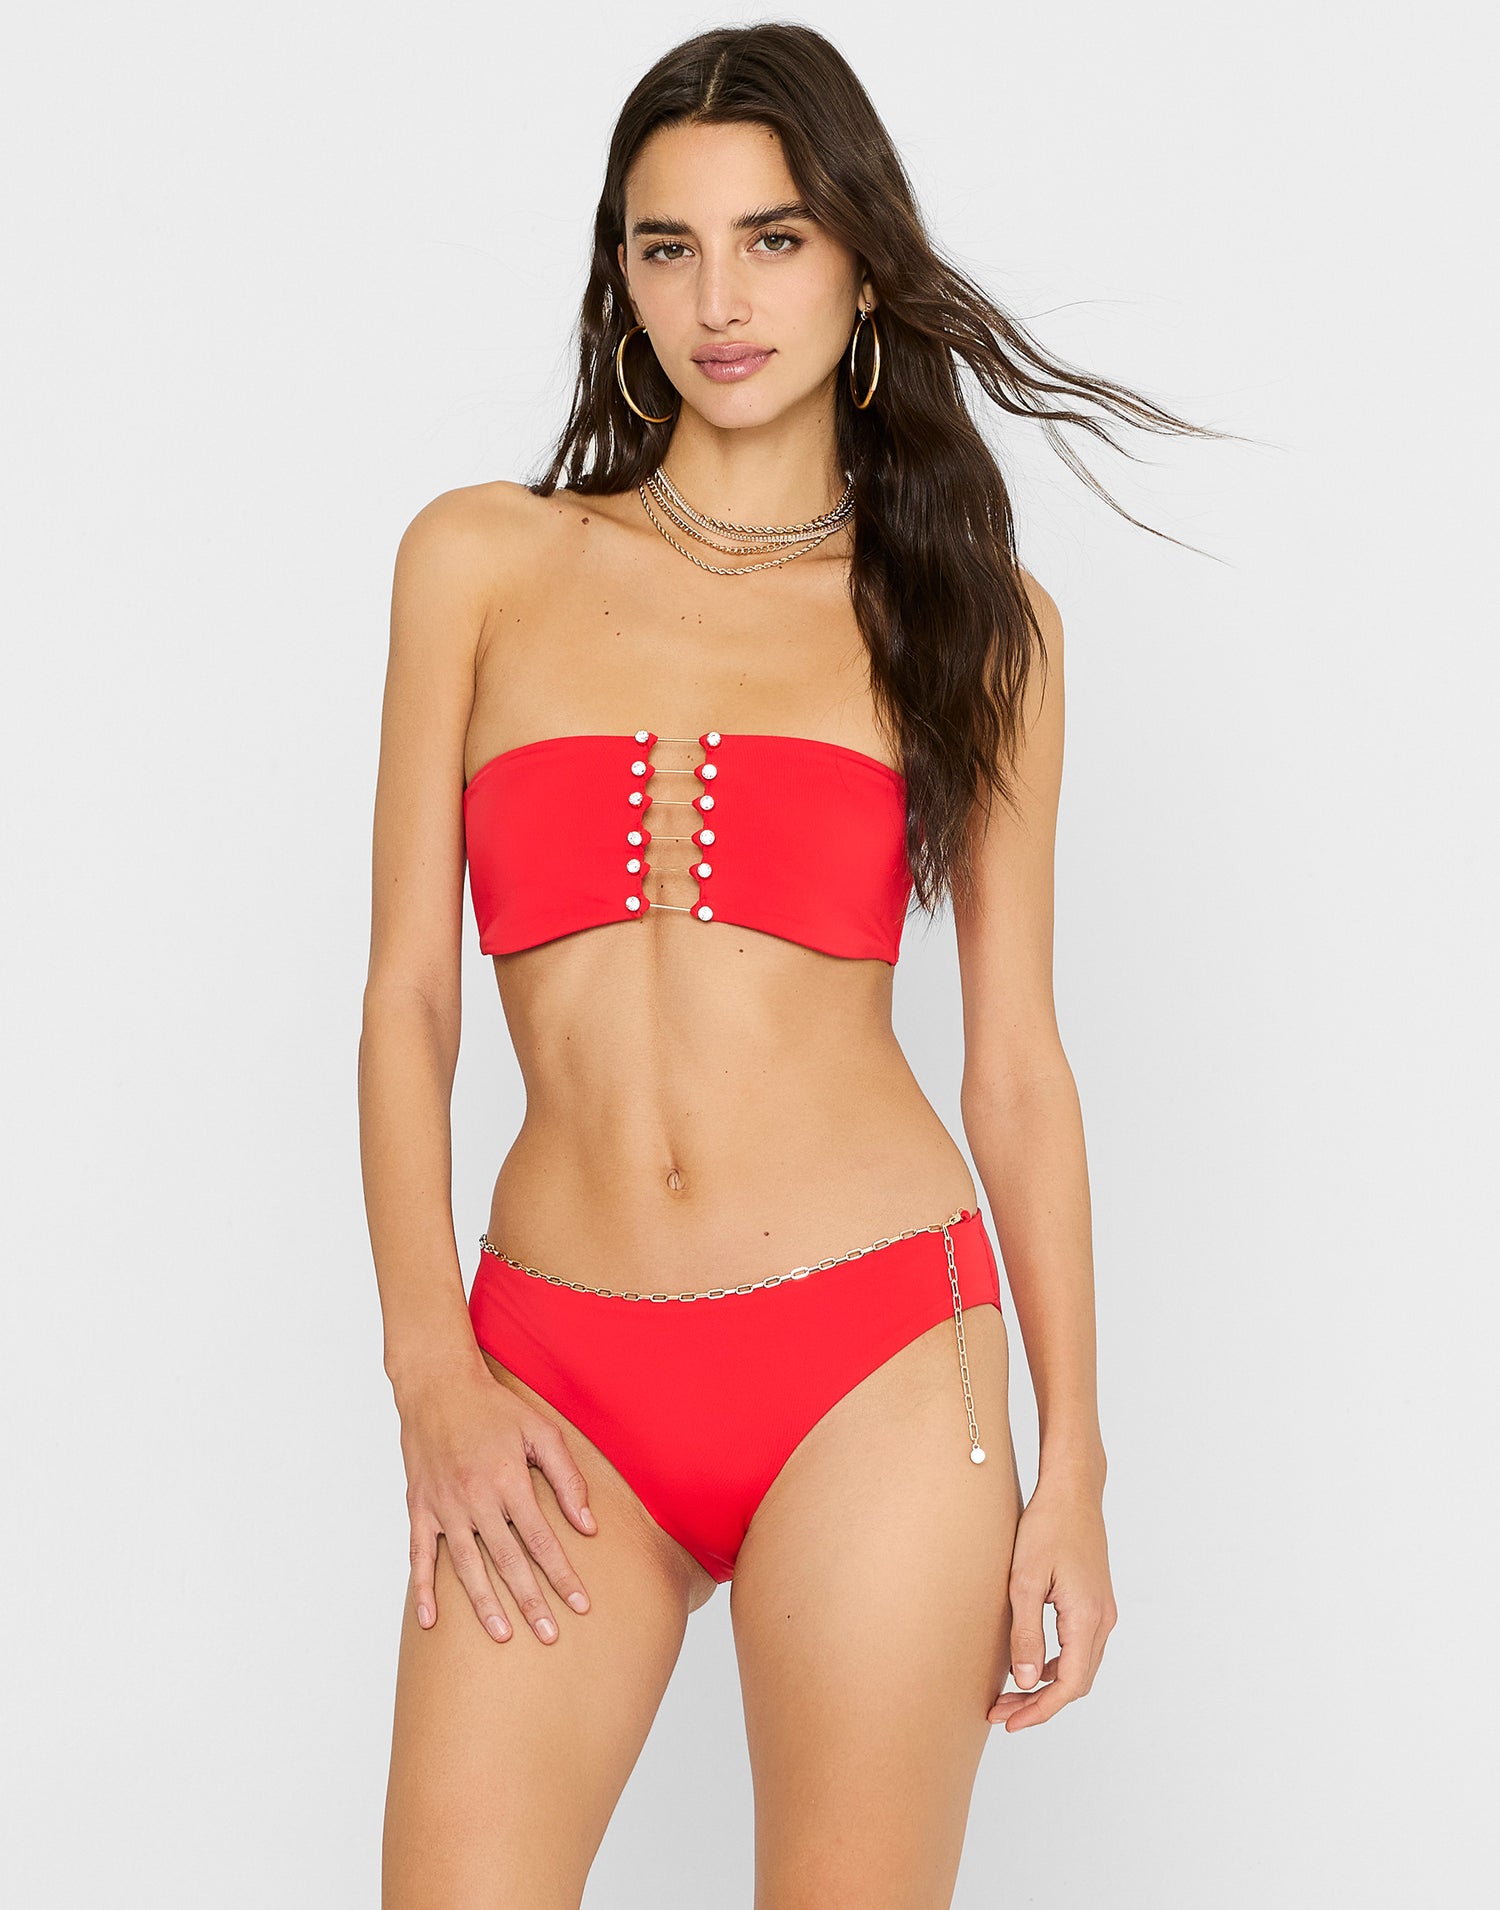 Noelani Full Coverage Bikini Bottom in Red with Removable Gold Chain Belt - Front View